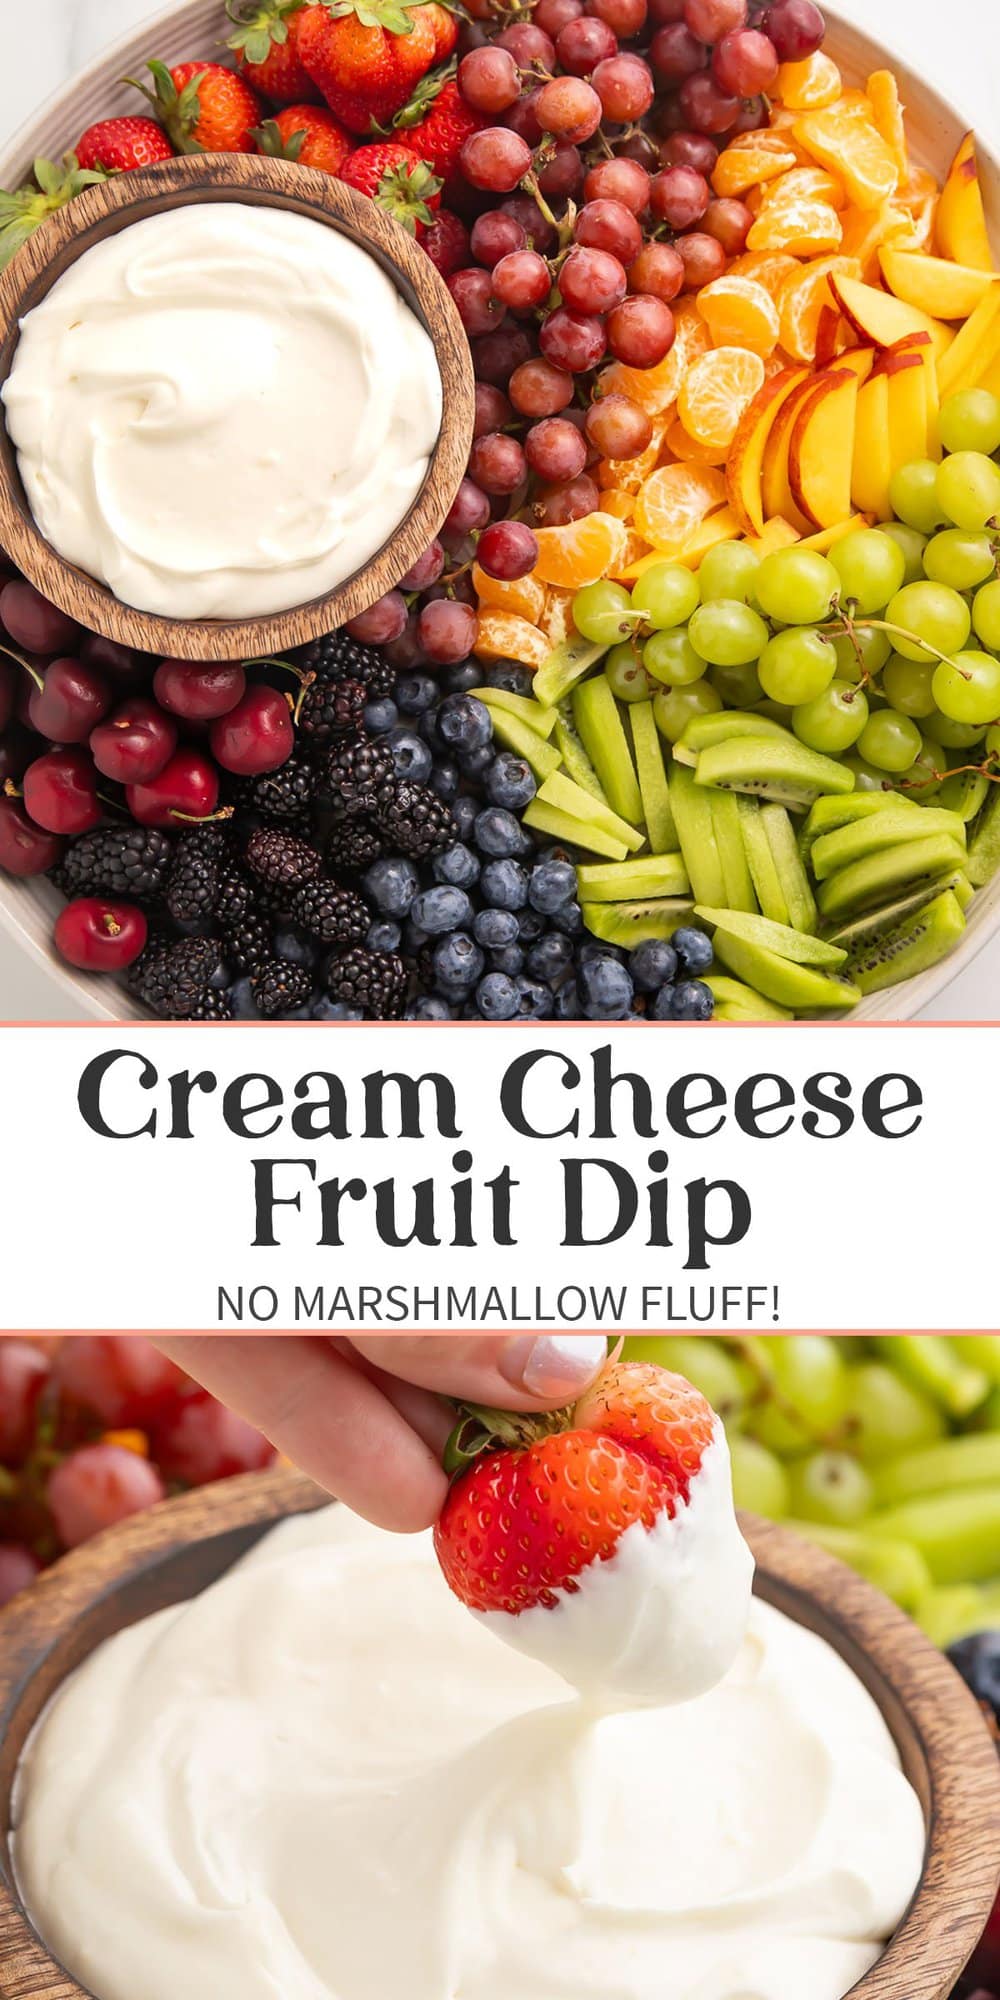 Pin graphic for cream cheese fruit dip.